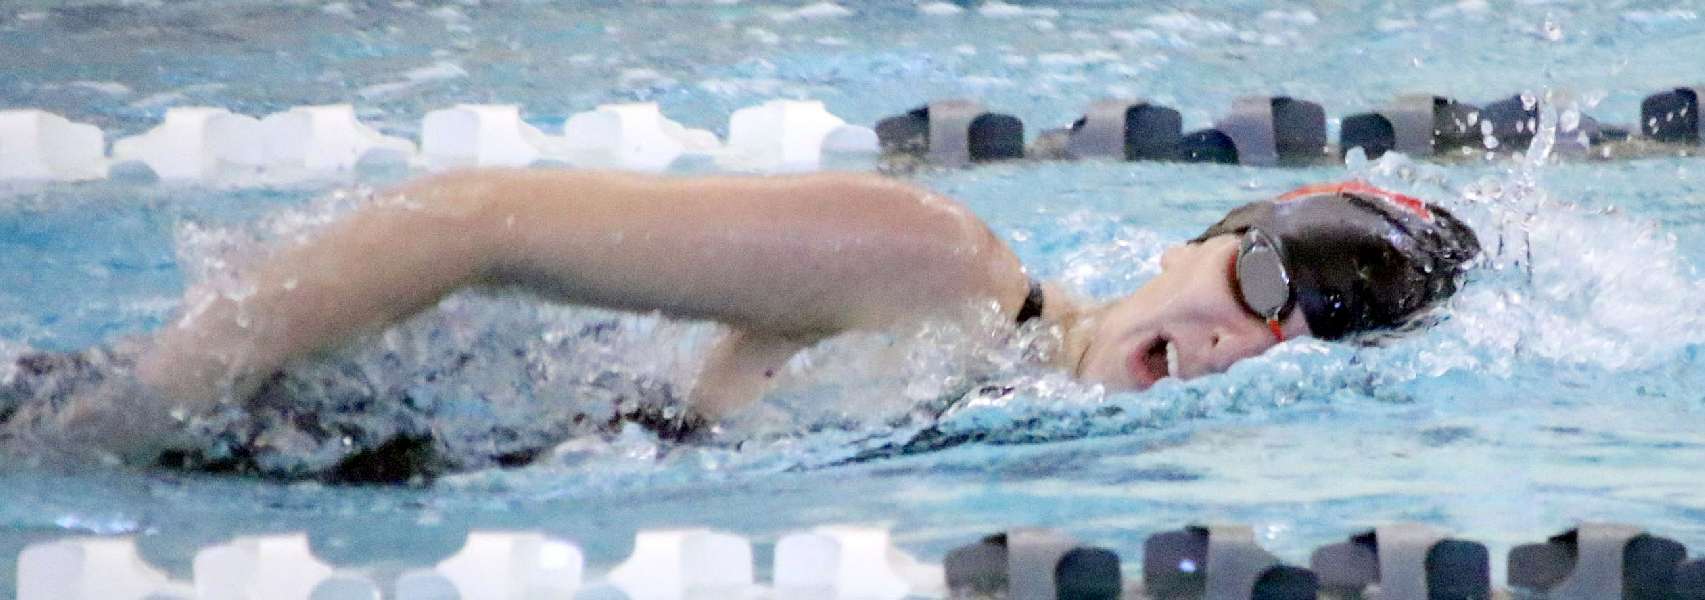 KITTLE BREAKS OWN SCHOOL RECORD; PACES WAVERLY AT LEAGUE MEET